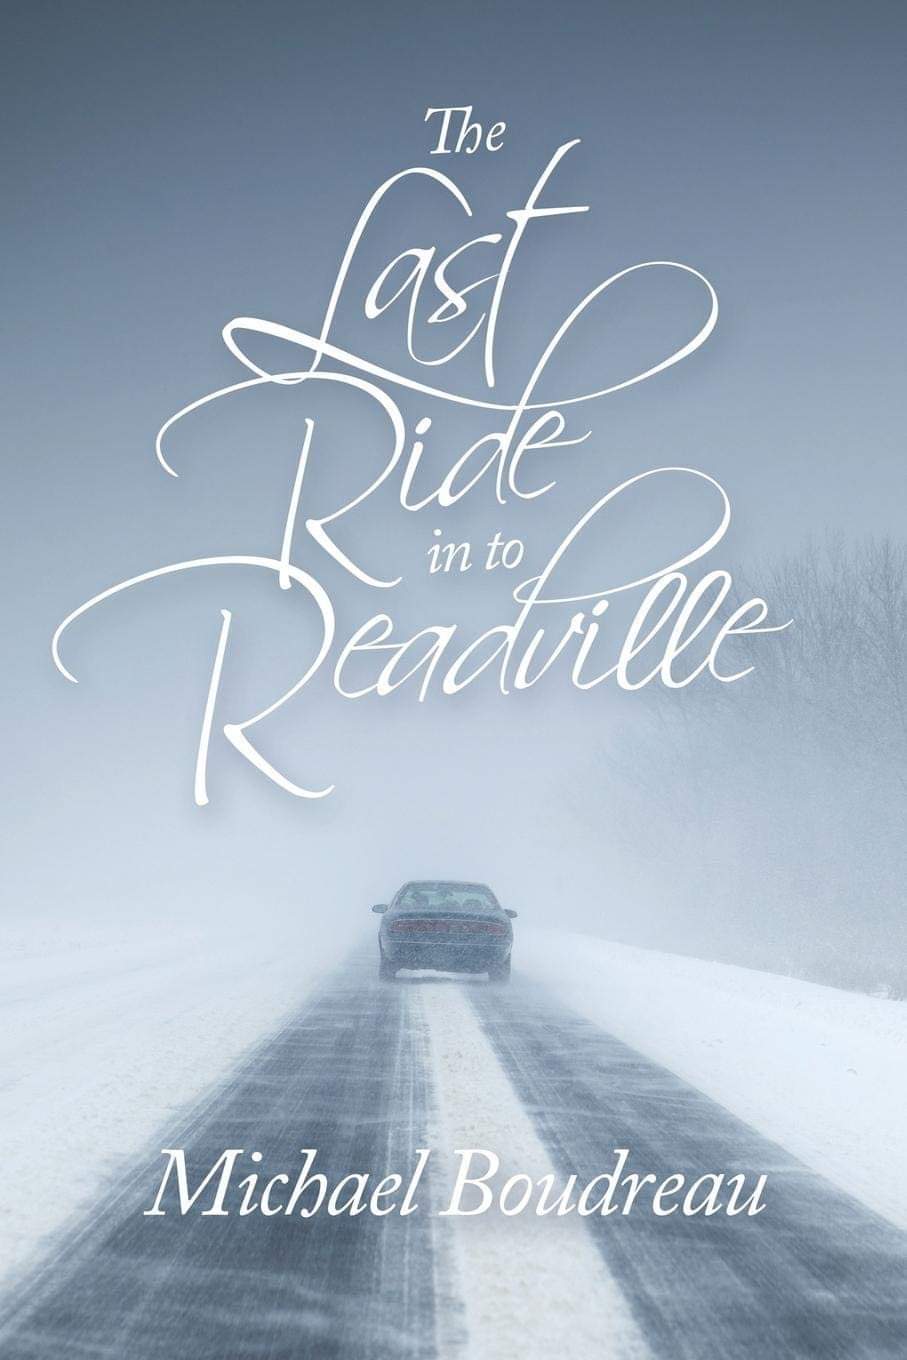 The Last Ride In to Readville